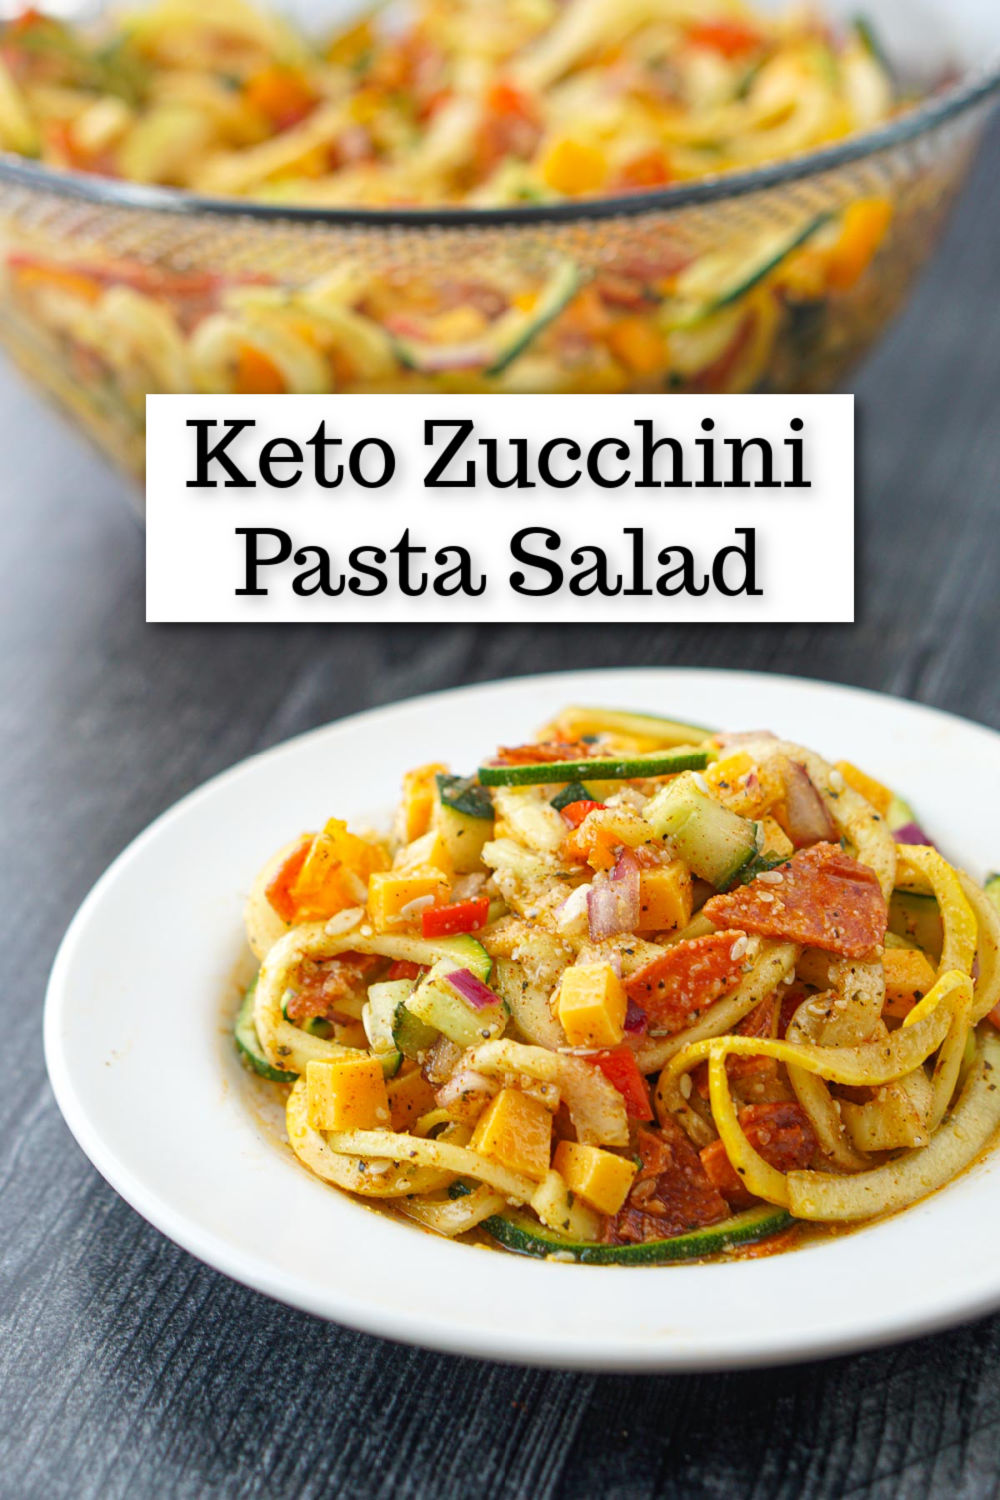 bowl and plate with keto zucchini pasta salad and text